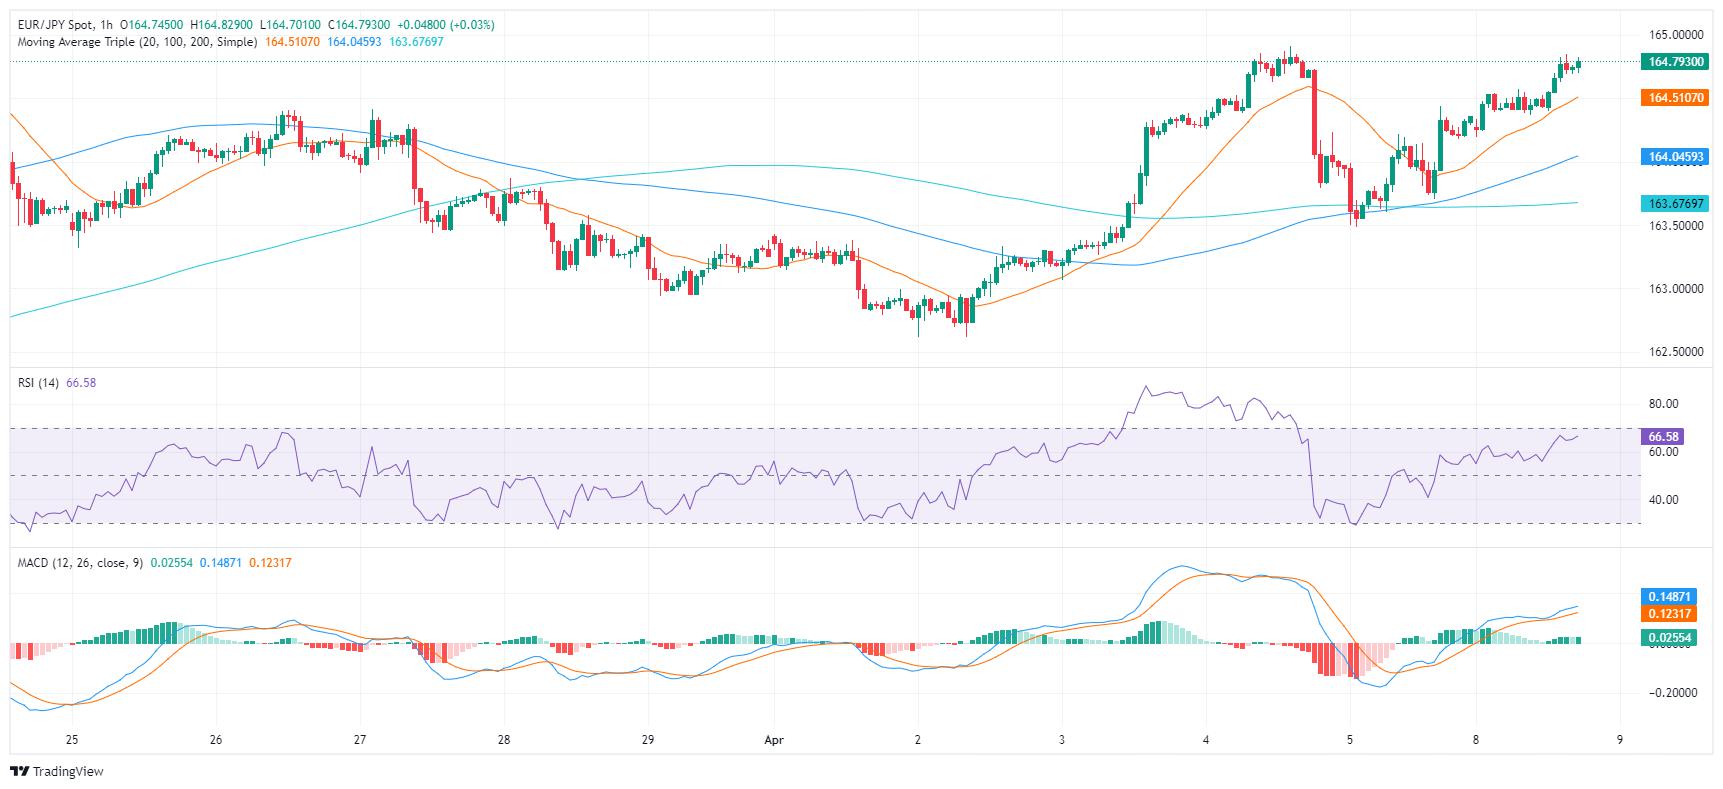 EUR/JPY Price Analysis: Bulls step in and momentum grows